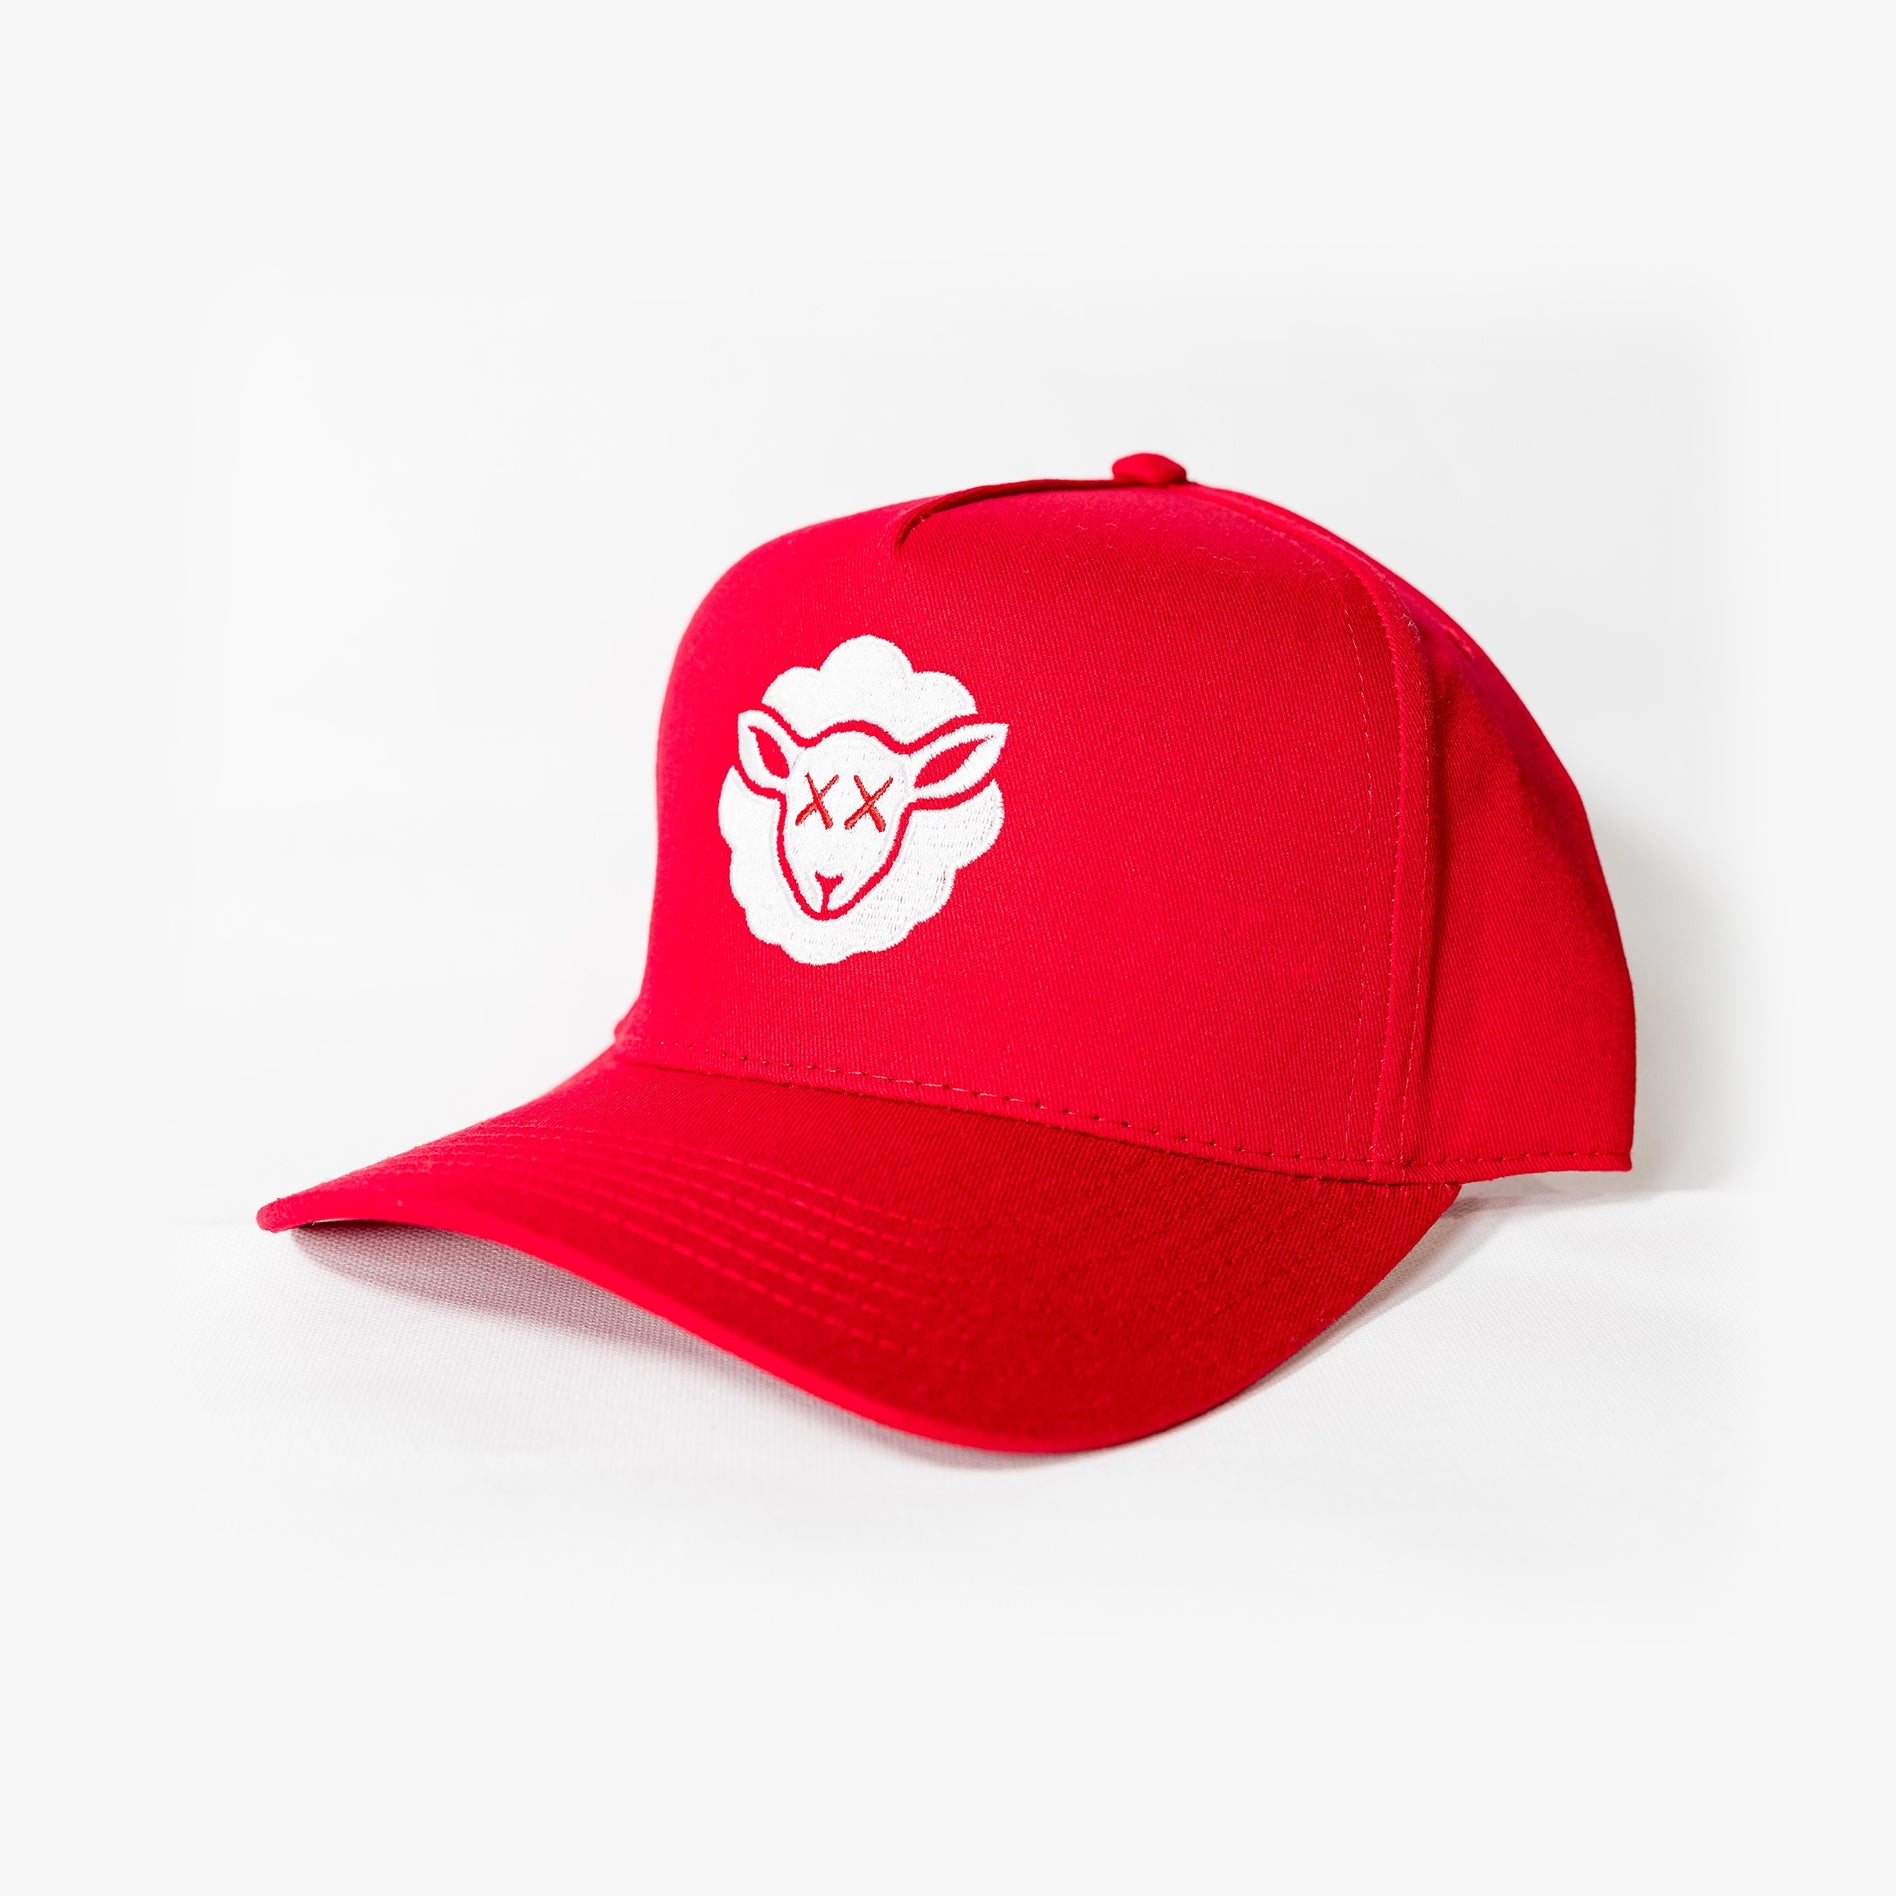 SHEEPEY Staple 5 Panel Hat Red